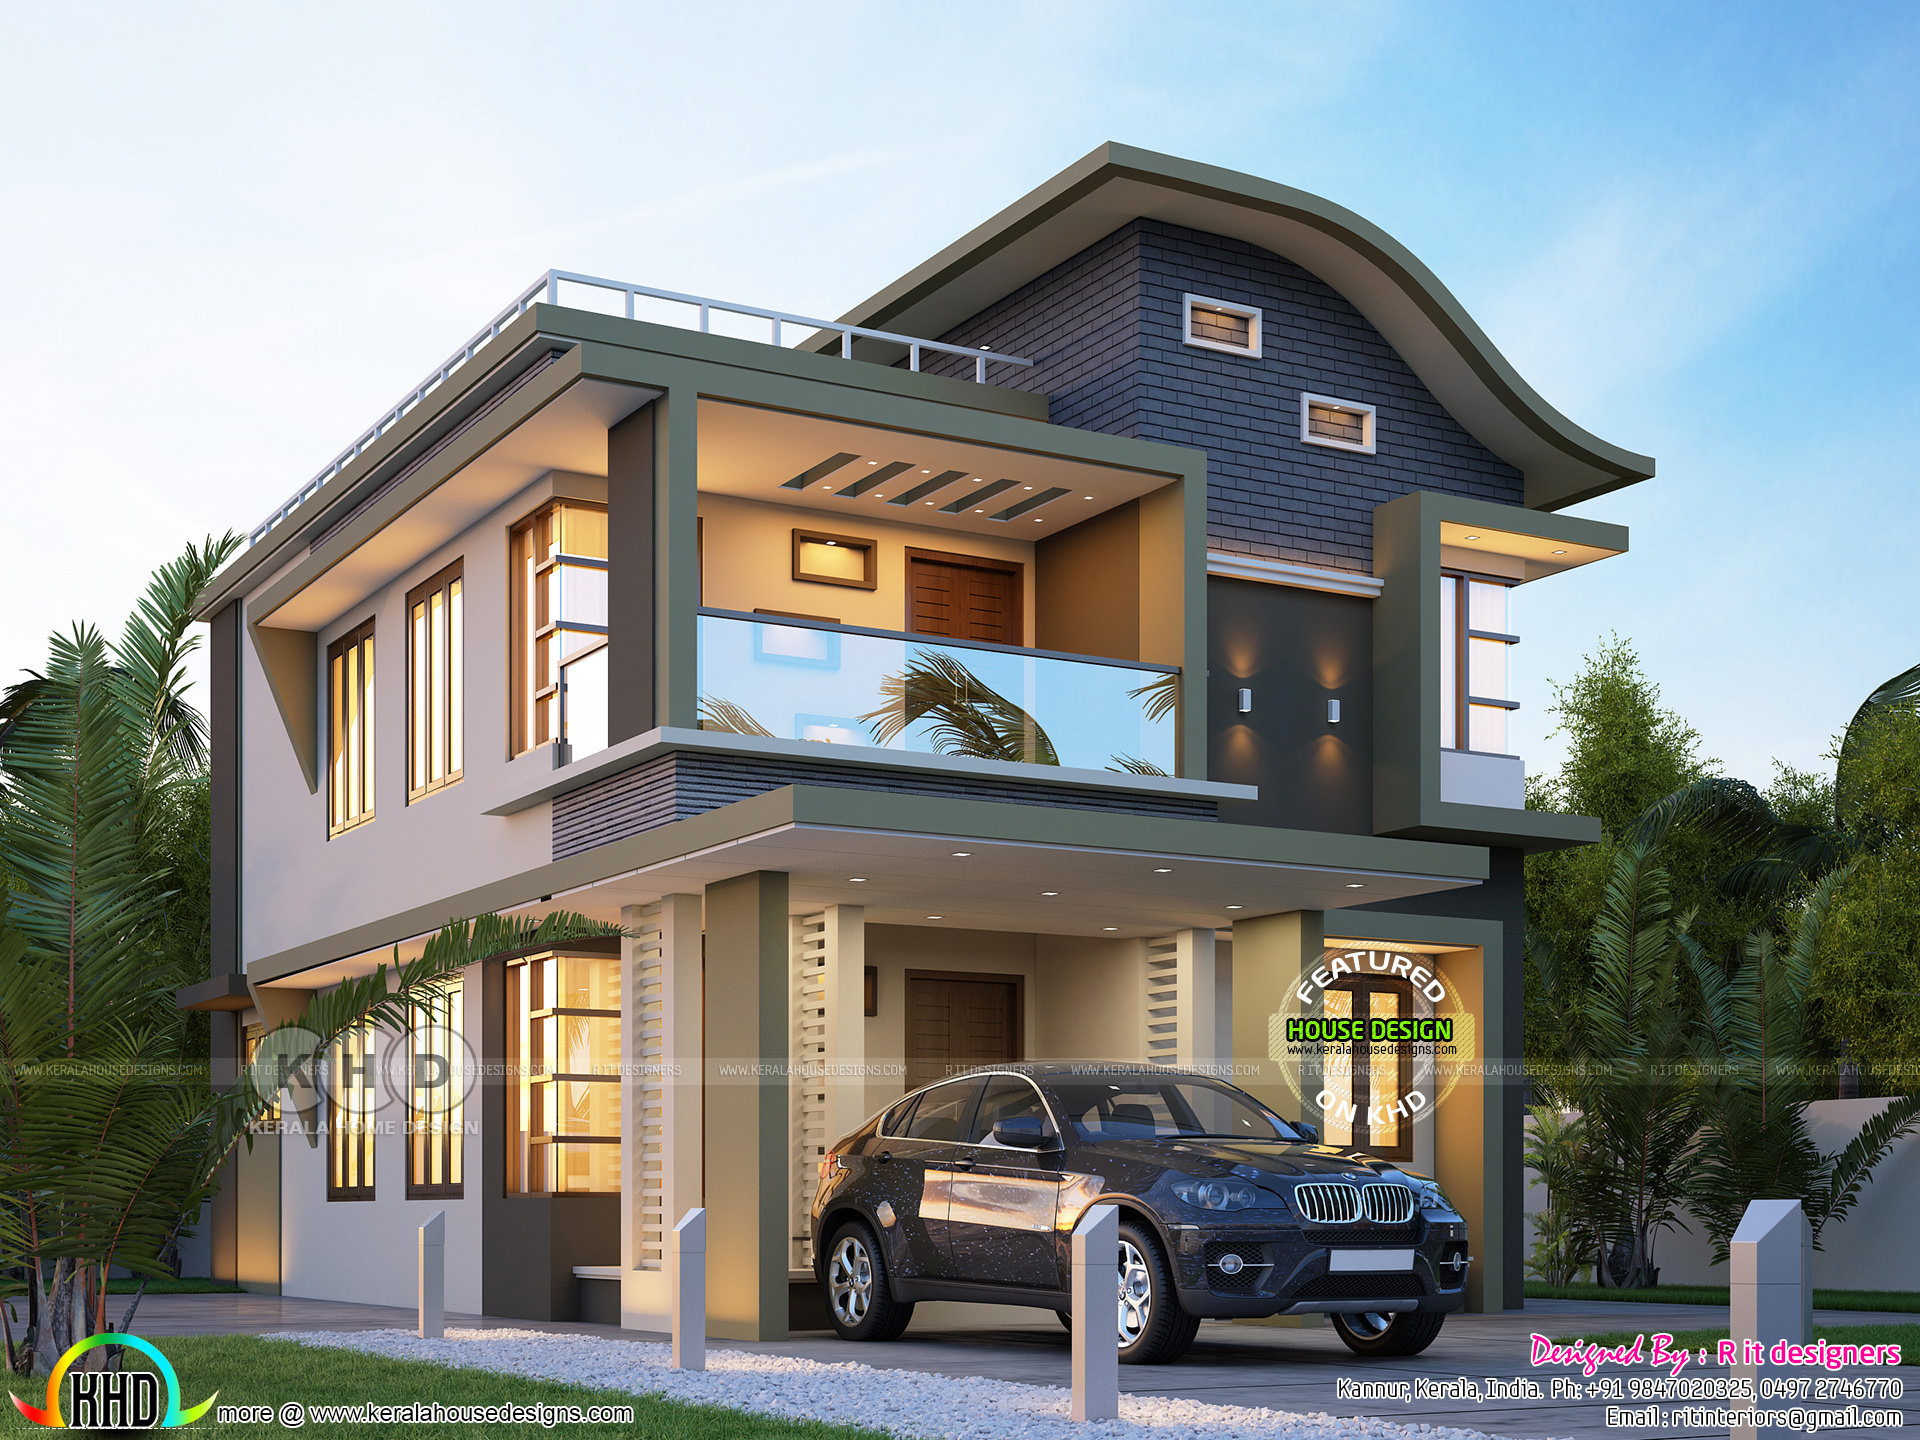  40 lakhs cost estimated contemporary  modern  house  Kerala  home  design  and floor plans  8000 